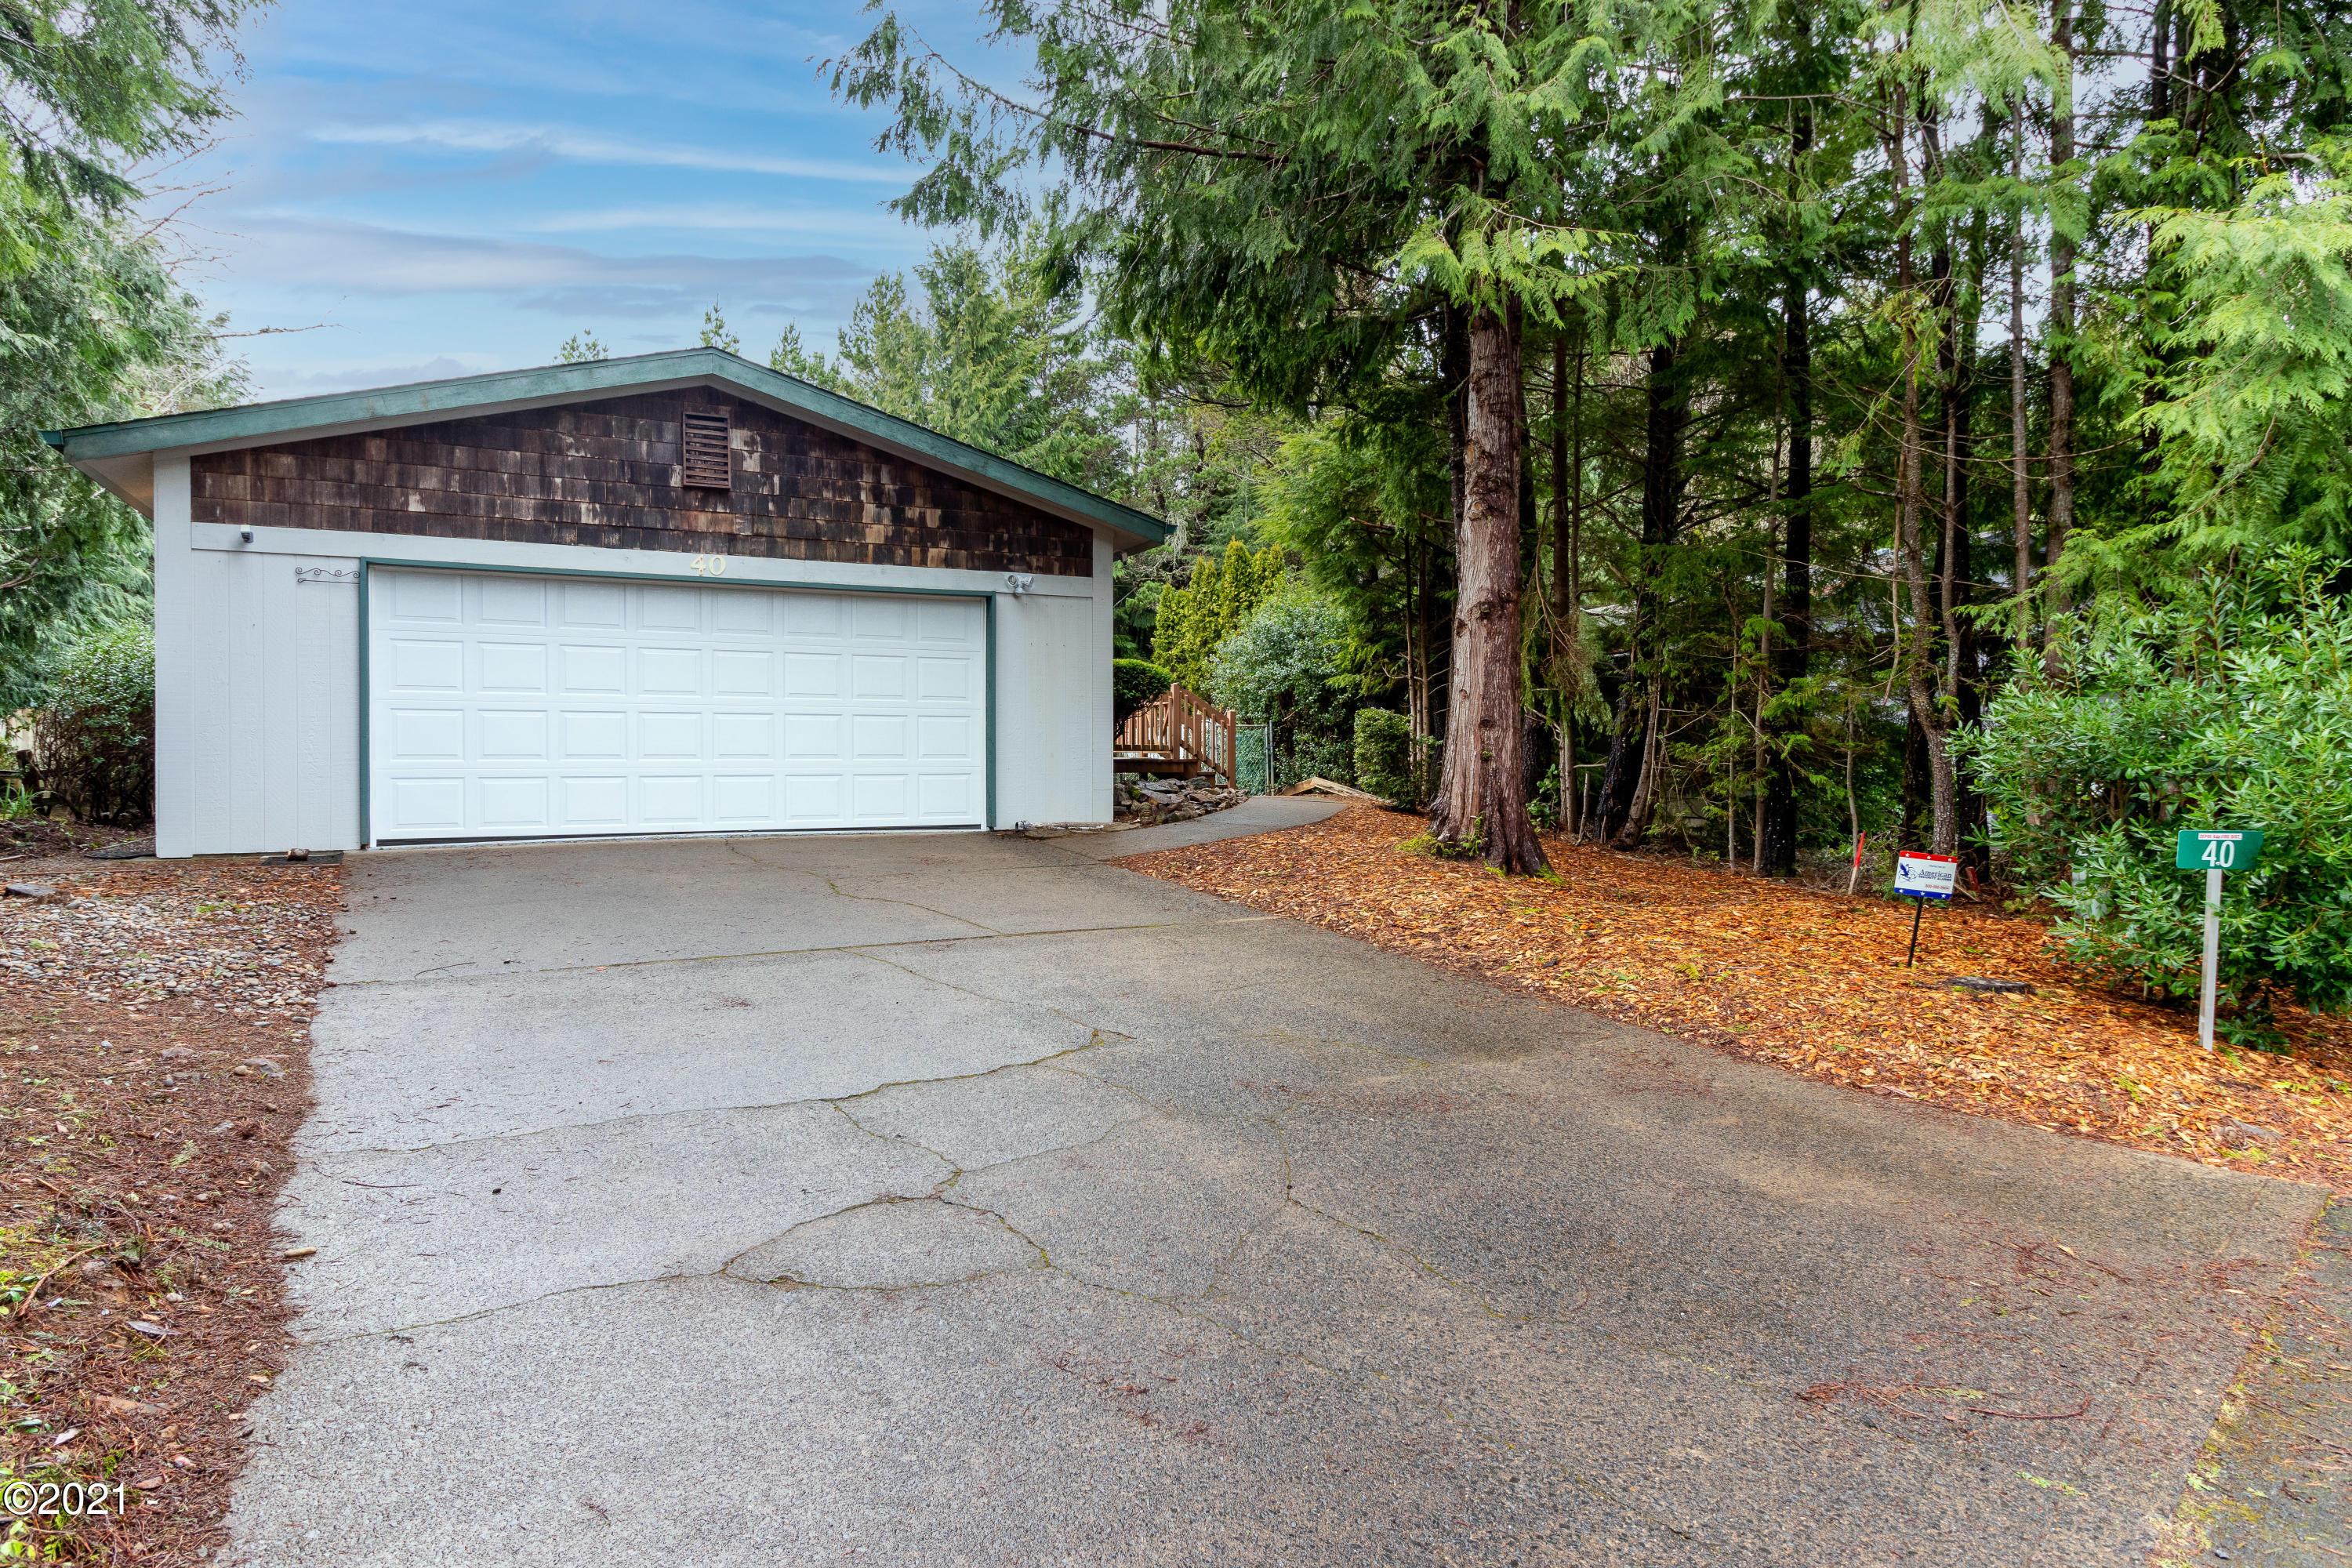 40 Beaver Ct Depoe Bay, Gleneden Beach, Lincoln City, Newport, Otis, Rose Lodge, Seal Rock, Waldport, Yachats, To Home Listings - Amy Plechaty, Emerald Coast Realty Real Estate, homes for sale, property for sale